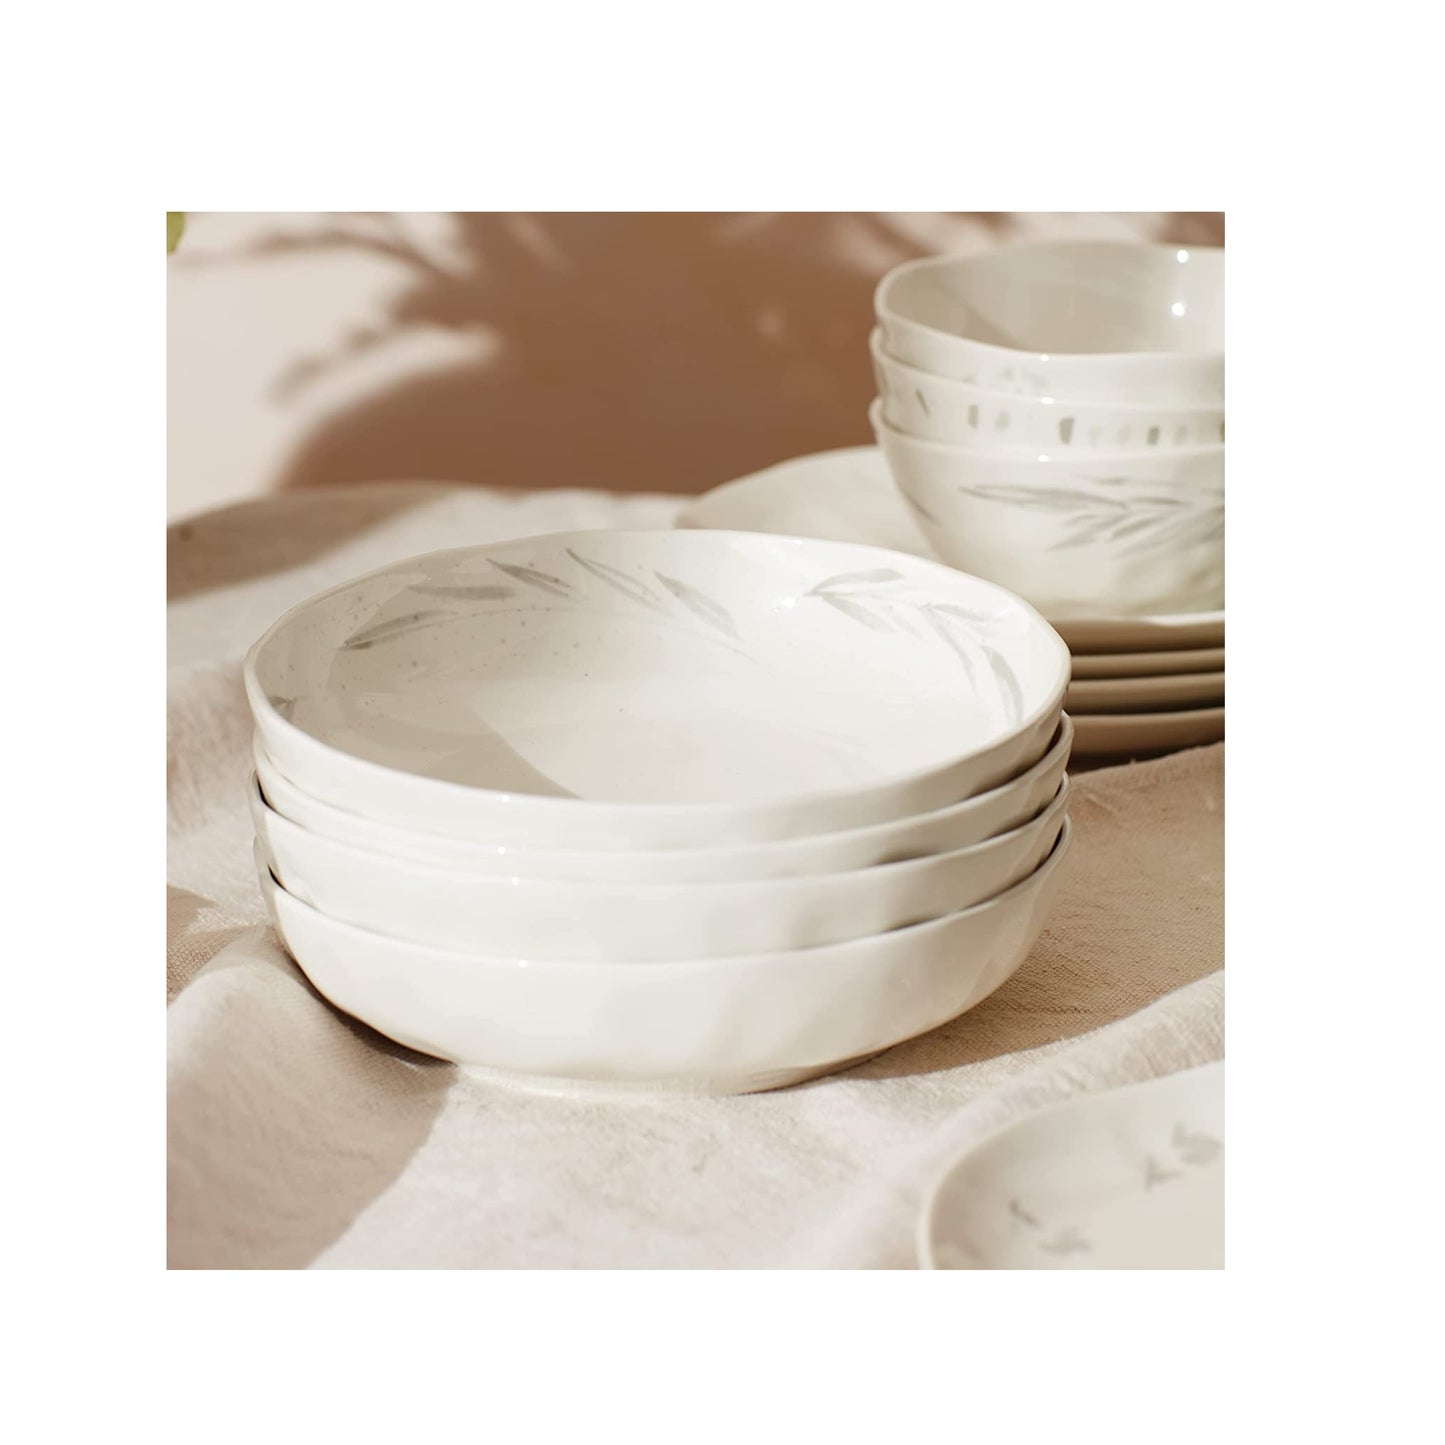 Oyster Bay Pasta Bowls, Set of 4 by Lenox